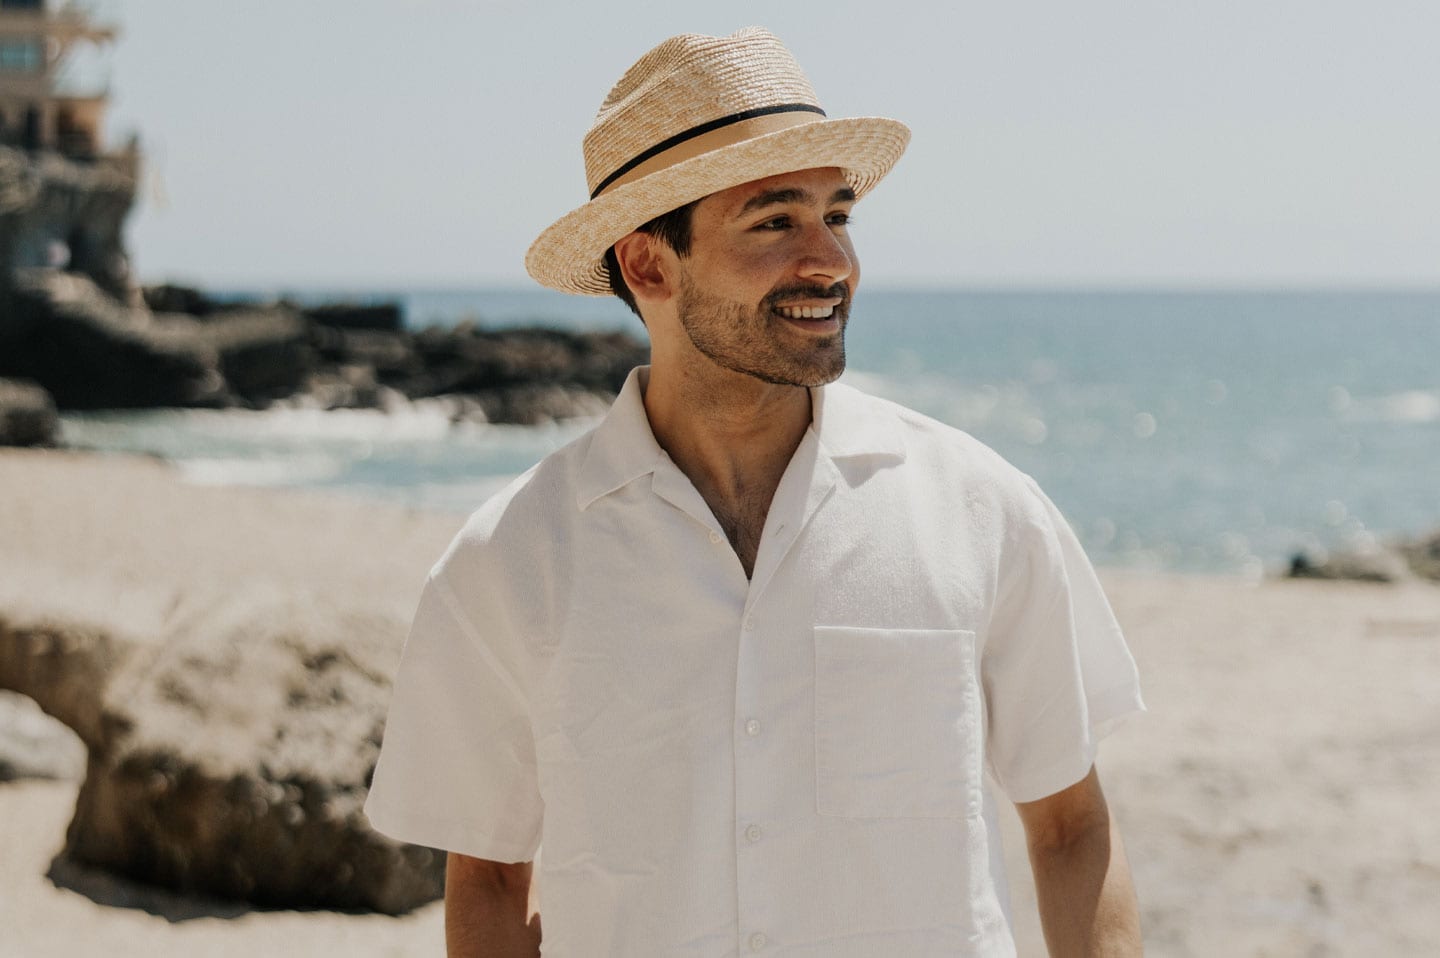 straw hats for men collection highlight fall refresh